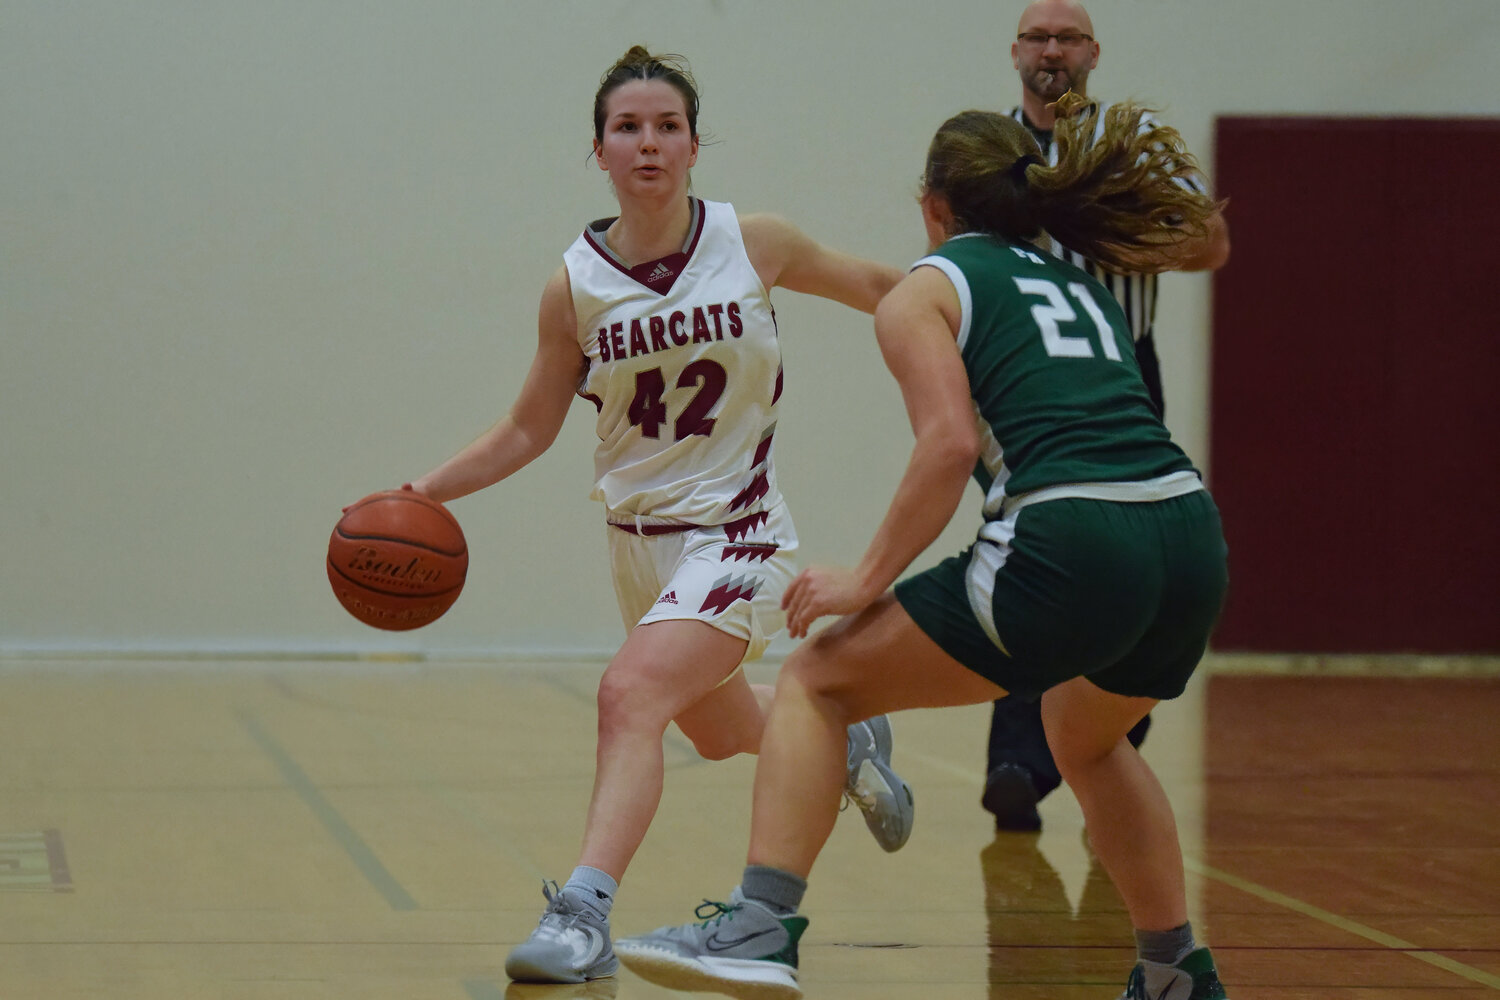 Amanda Bennett dribbles around a defender during W.F. West's 57-24 win over Port Angeles on Dec. 2.